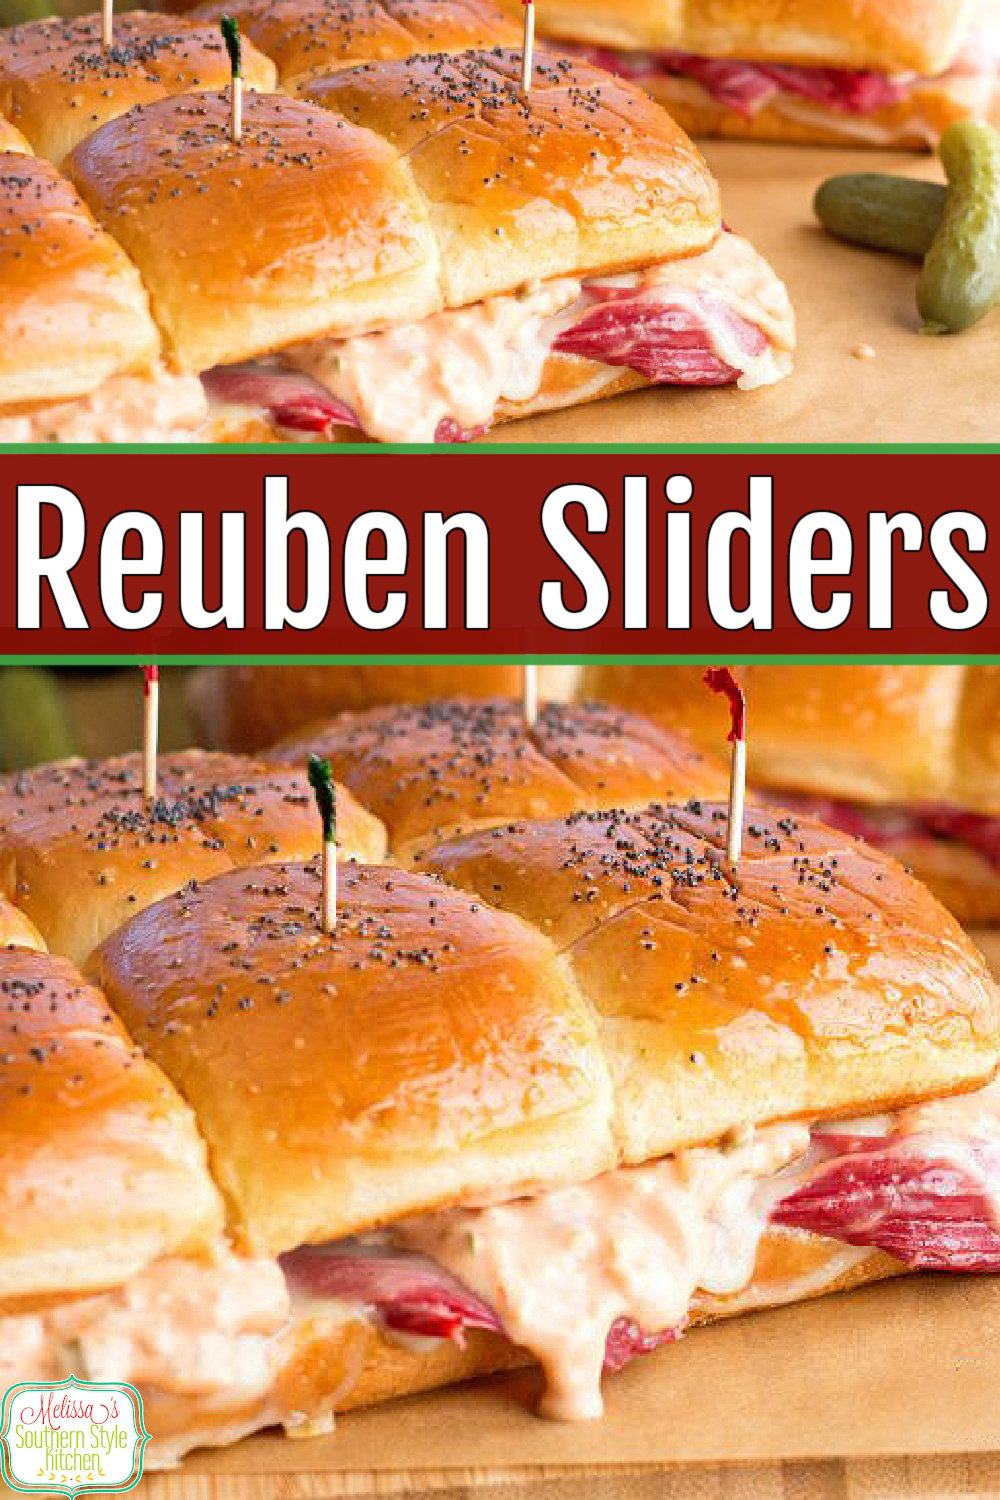 These mini Reuben Sliders are topped with a homemade Thousand Island dressing that's to die for! #reubensandwich #reubensliders #cornedbeef #cornedbeefrecipes #beef #partyfood #appetizers #sandwiches #thousandislanddressing #stpatricksday #stpaddys #footballfood via @melissasssk